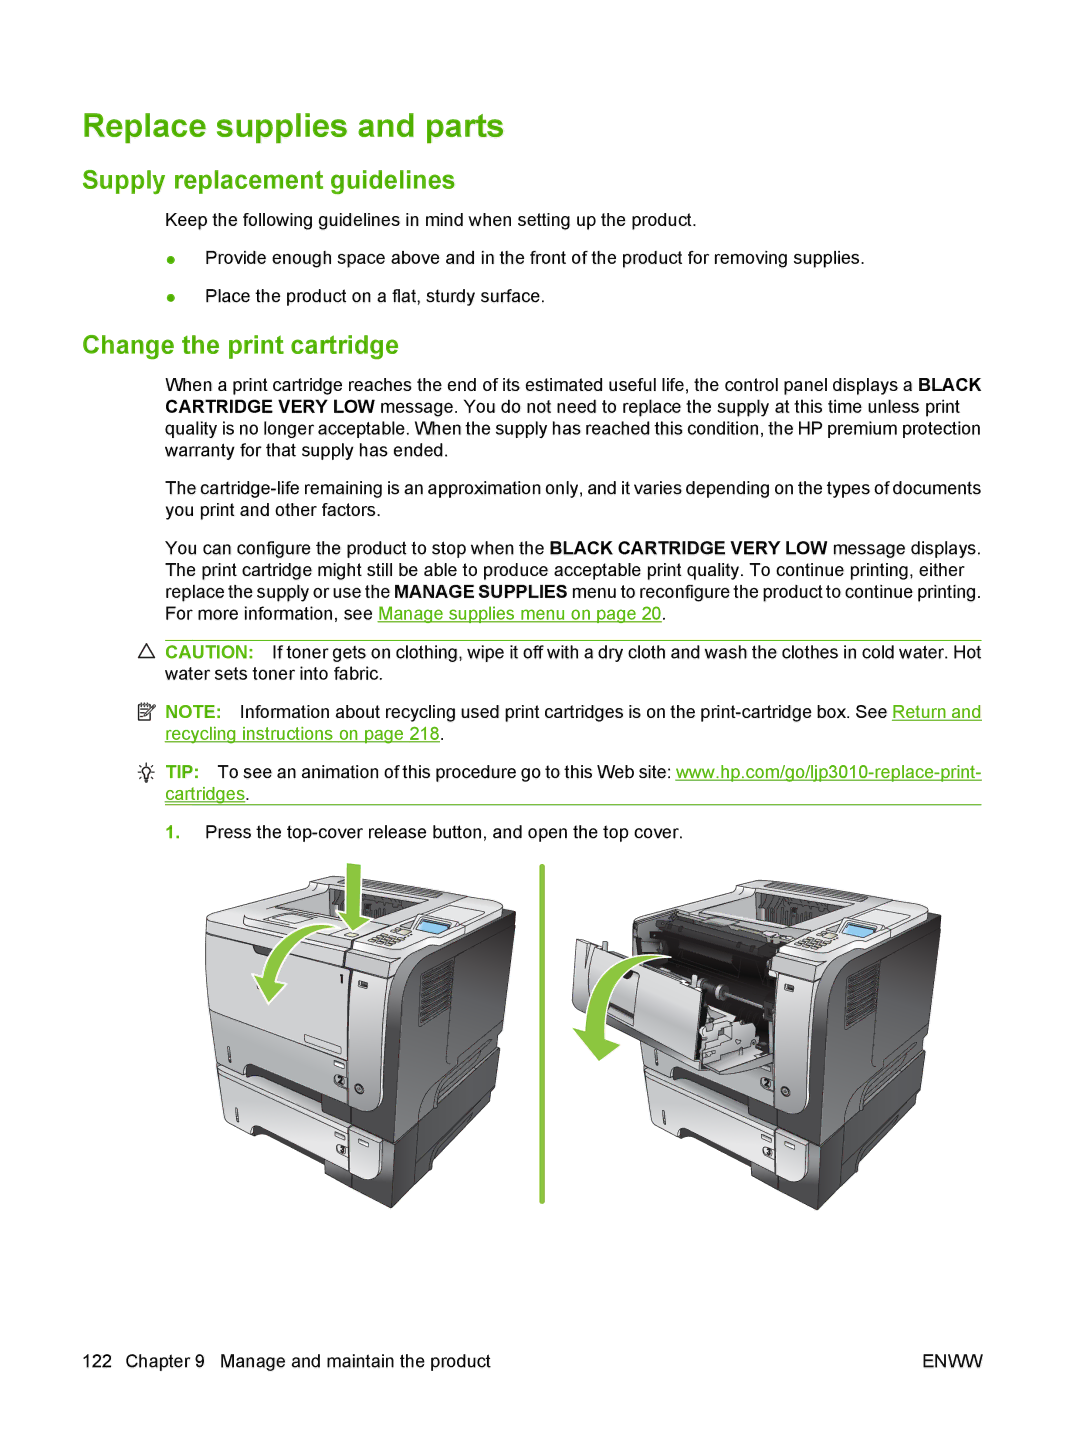 HP Laser CE527A#ABA manual Replace supplies and parts, Supply replacement guidelines, Change the print cartridge 